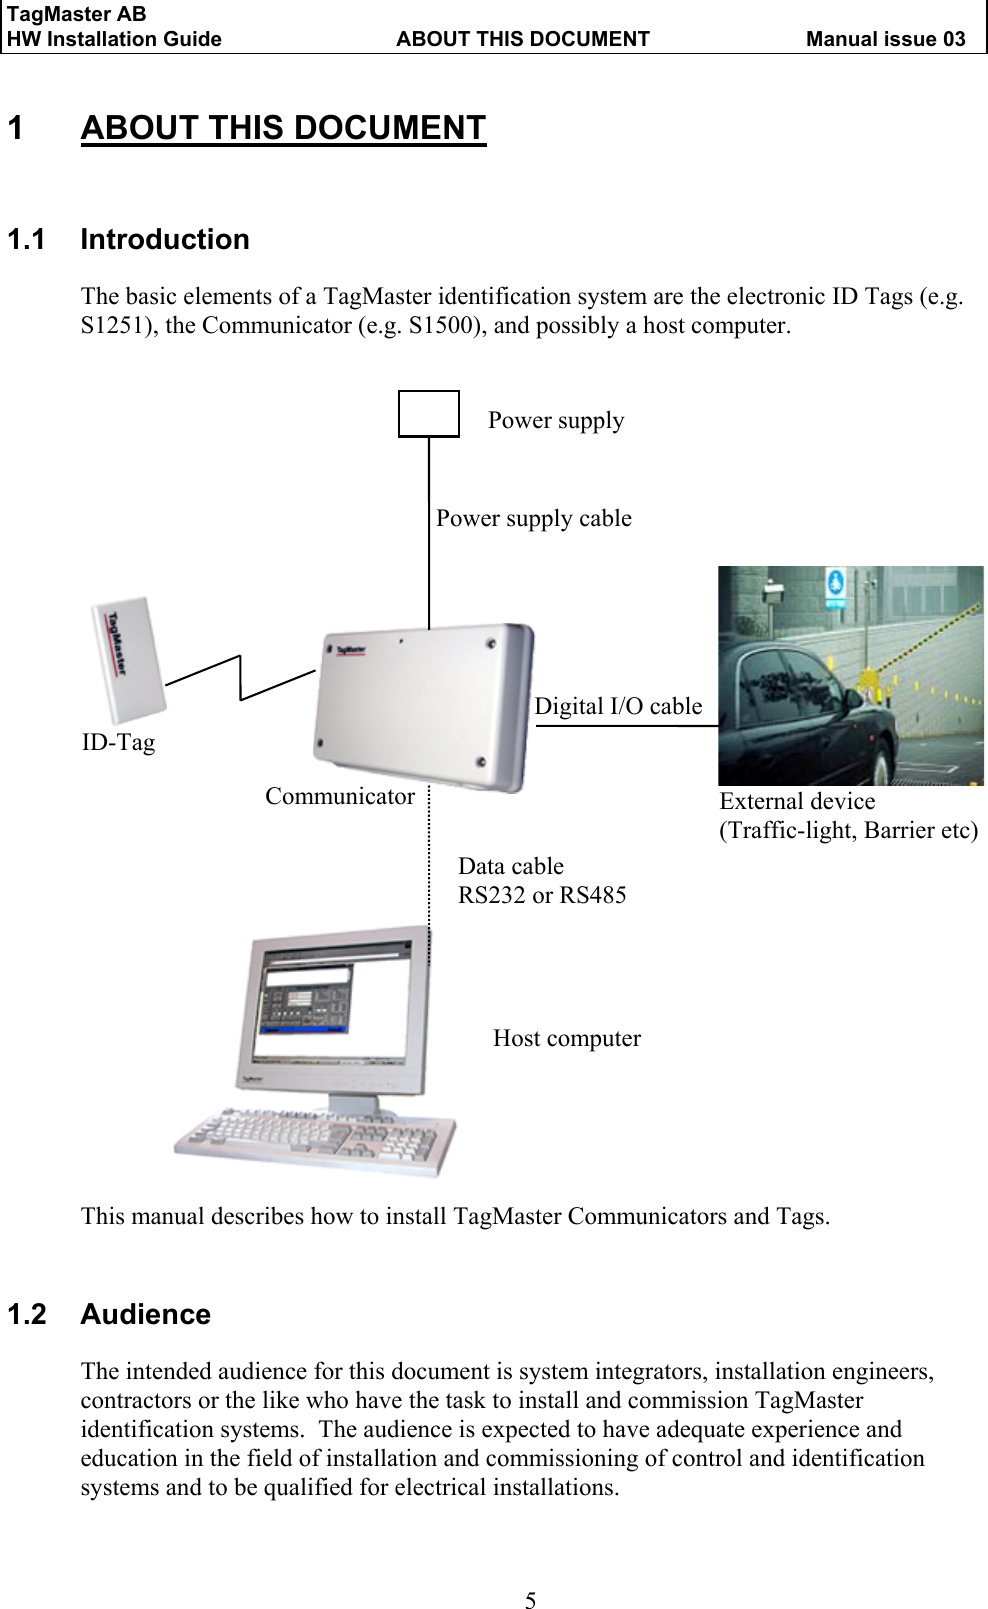 TagMaster AB     HW Installation Guide  ABOUT THIS DOCUMENT  Manual issue 03  5 Host computer 1  ABOUT THIS DOCUMENT 1.1 Introduction The basic elements of a TagMaster identification system are the electronic ID Tags (e.g. S1251), the Communicator (e.g. S1500), and possibly a host computer.                               This manual describes how to install TagMaster Communicators and Tags.   1.2 Audience The intended audience for this document is system integrators, installation engineers, contractors or the like who have the task to install and commission TagMaster identification systems.  The audience is expected to have adequate experience and education in the field of installation and commissioning of control and identification systems and to be qualified for electrical installations.  ID-Tag Power supply External device (Traffic-light, Barrier etc) Power supply cable Digital I/O cable Data cable   RS232 or RS485 Communicator